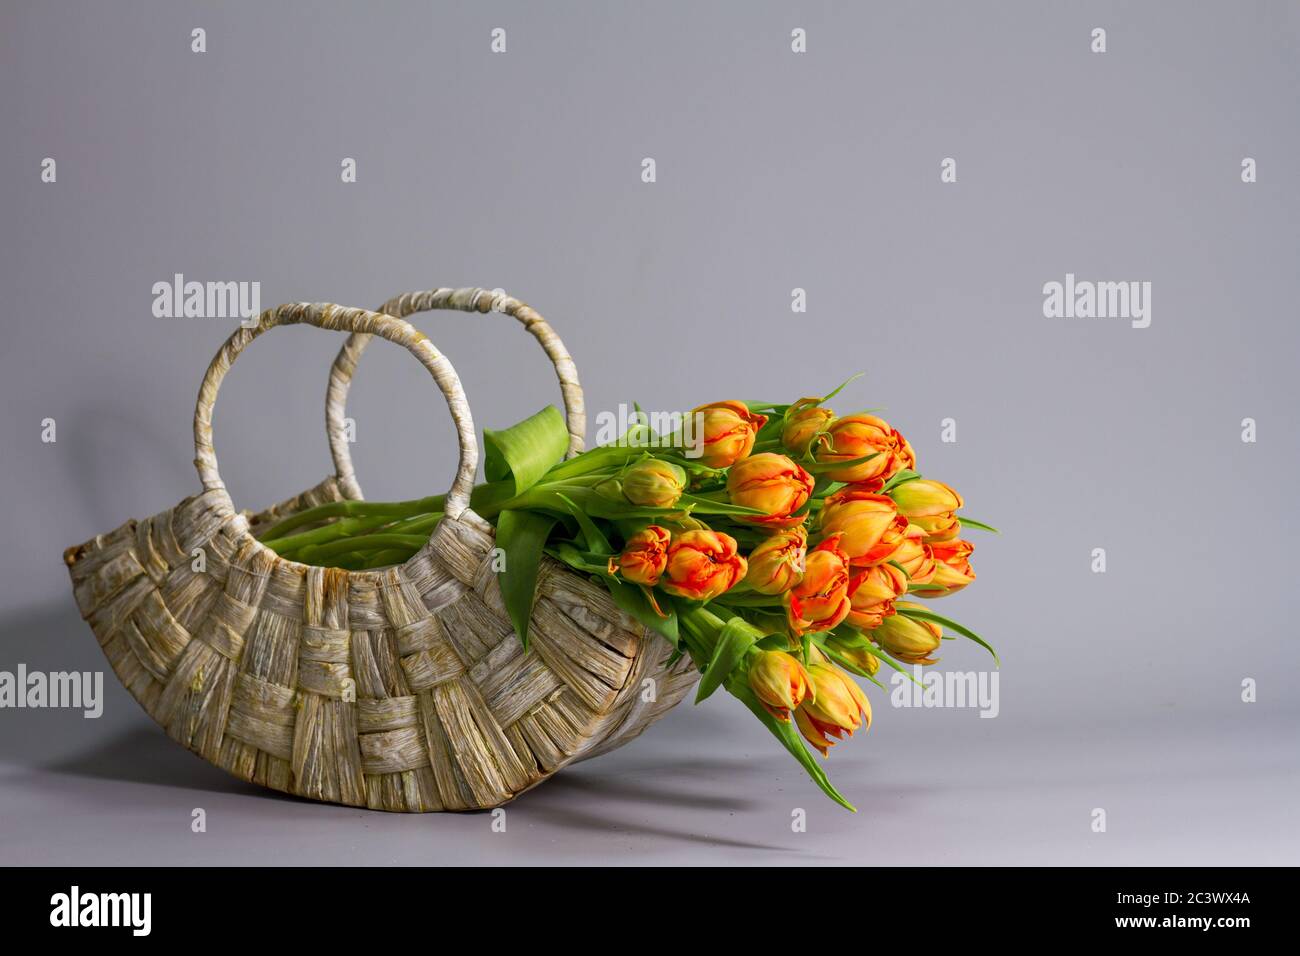 Straw basket with bouquet of fresh orange tulips on gray background, greeting or gift concept Stock Photo